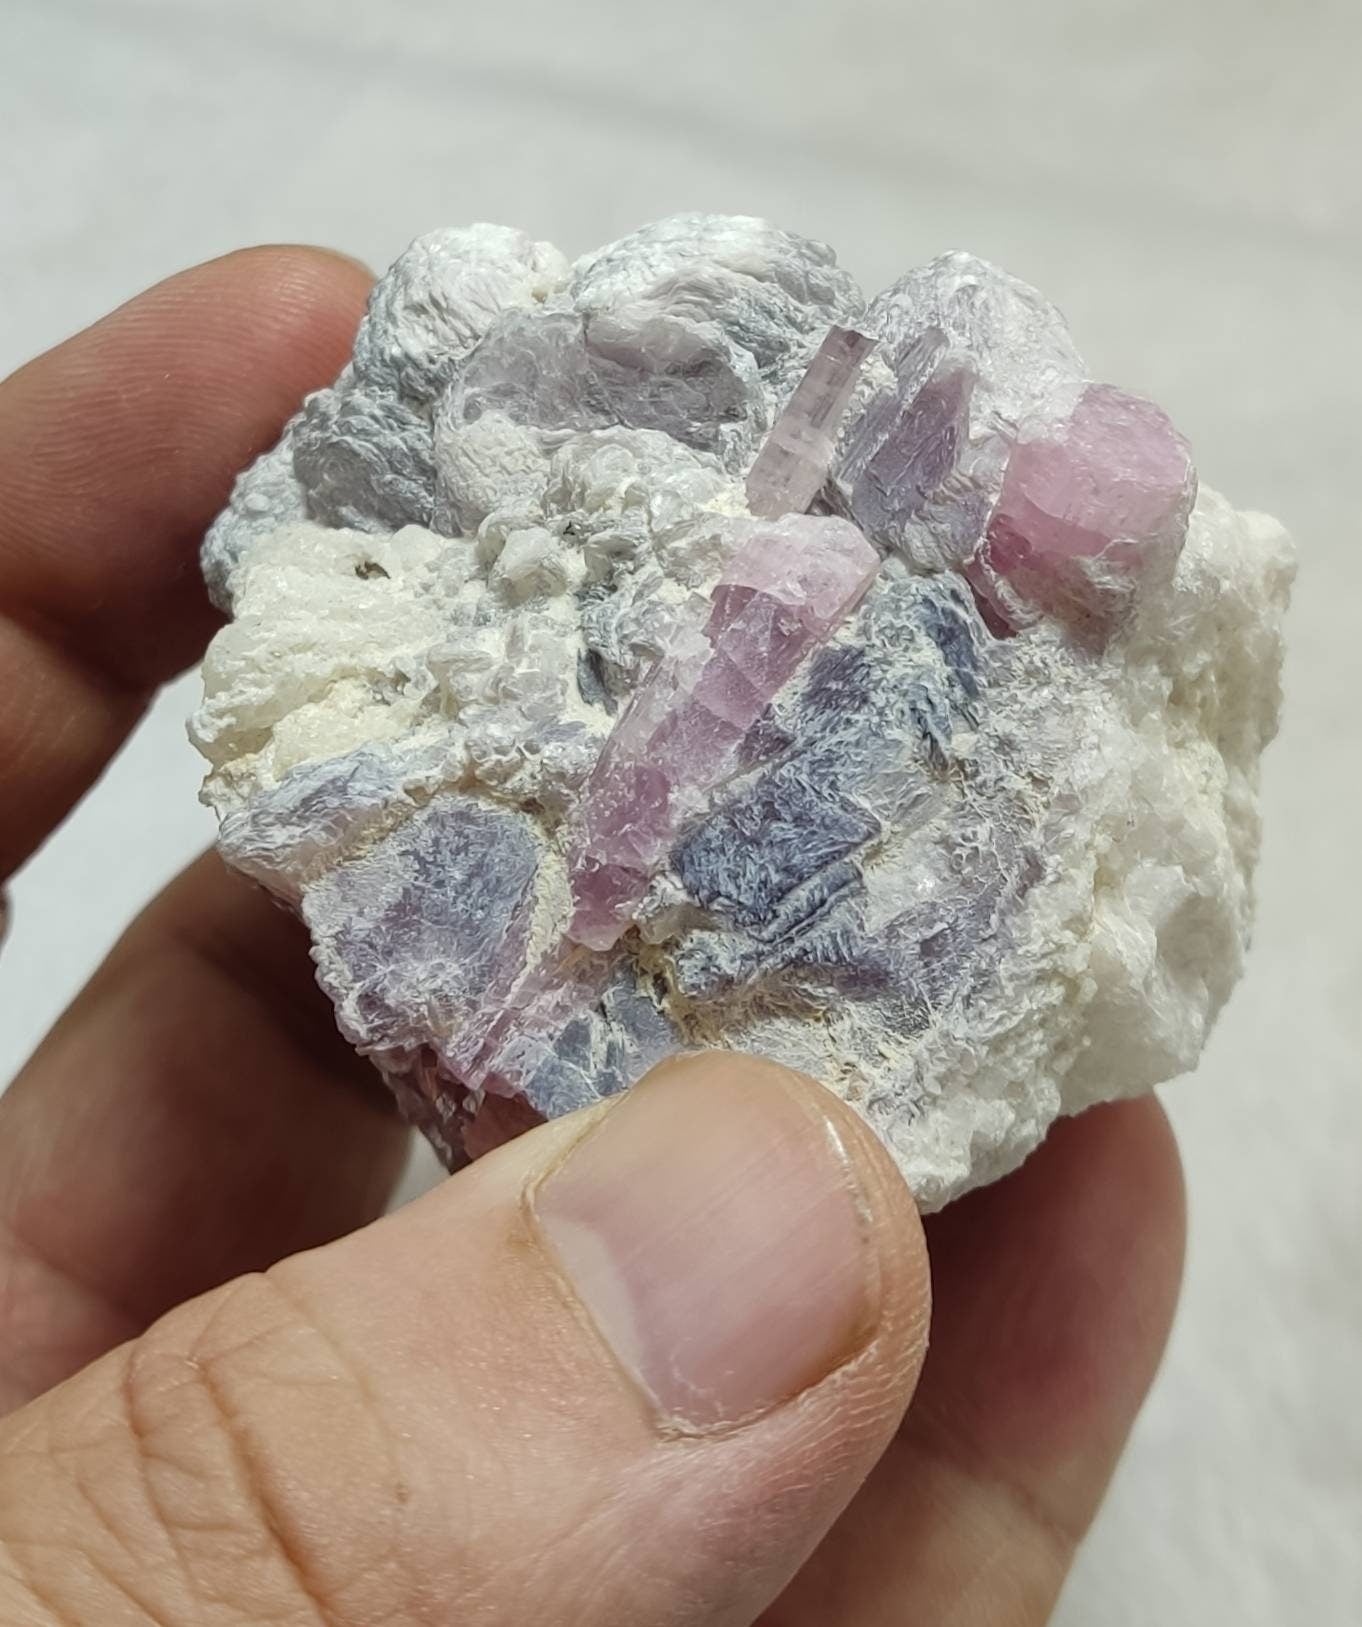 An amazing beautiful specimen of pink Tourmalines crystals with associated lepidolite mica and Albite 203 grams